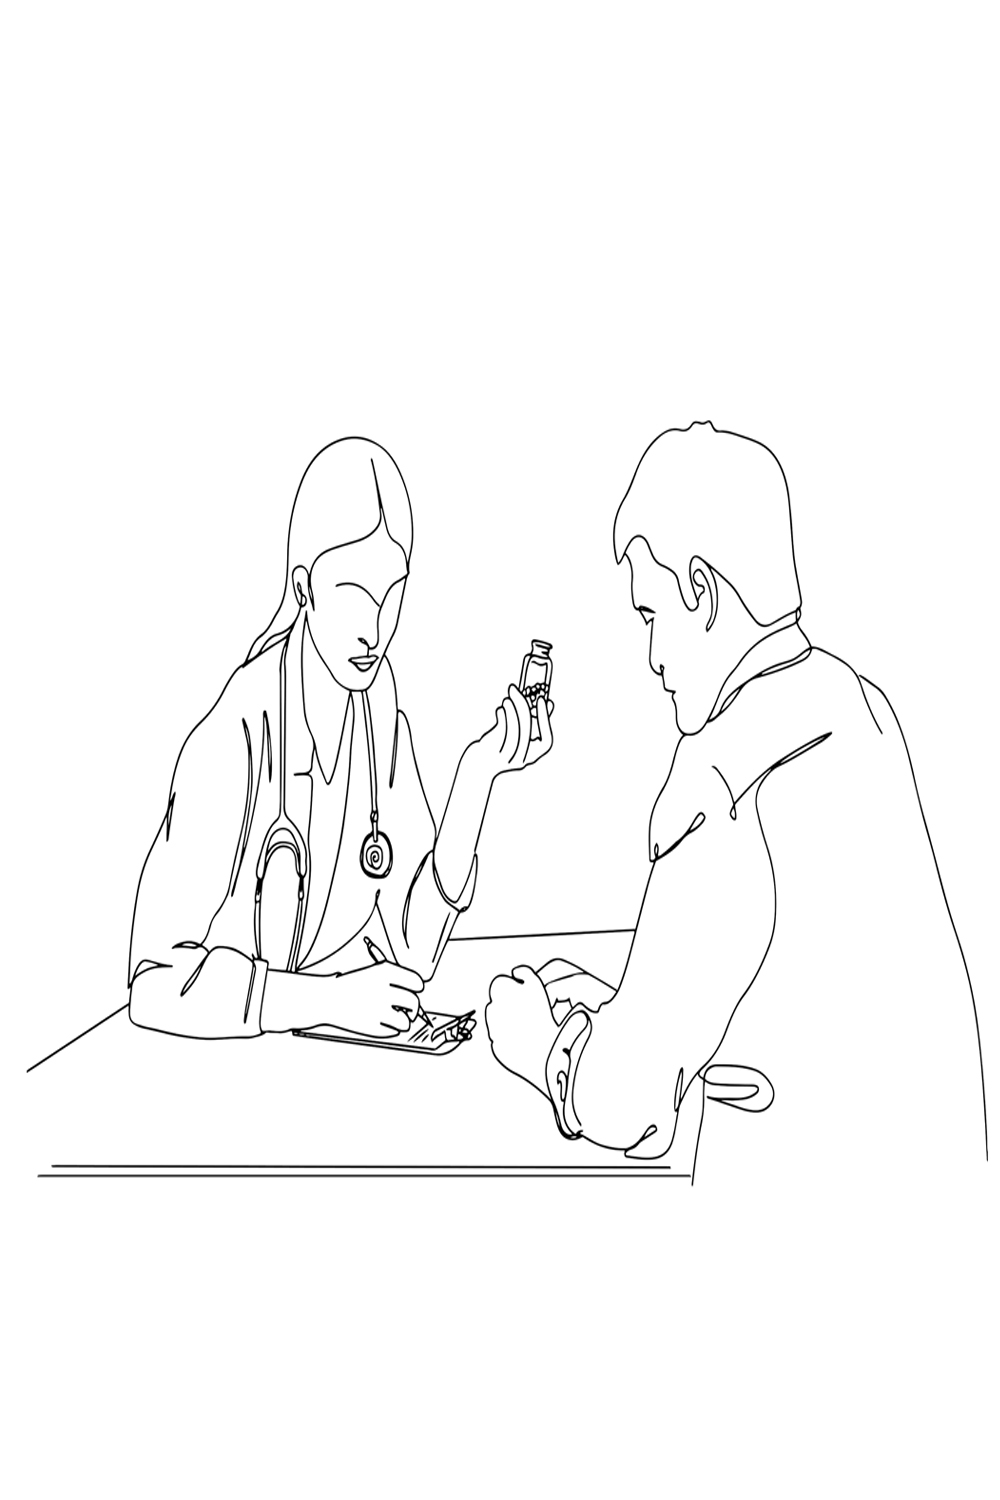 One-Line Doctor Visit: Prescription Time "Cartoon Medication Moment: Doctor's Advice" "Simple Sketch: Female Doctor Prescribing Pills" "Seamless Drawing: Doctor Giving Medication" pinterest preview image.